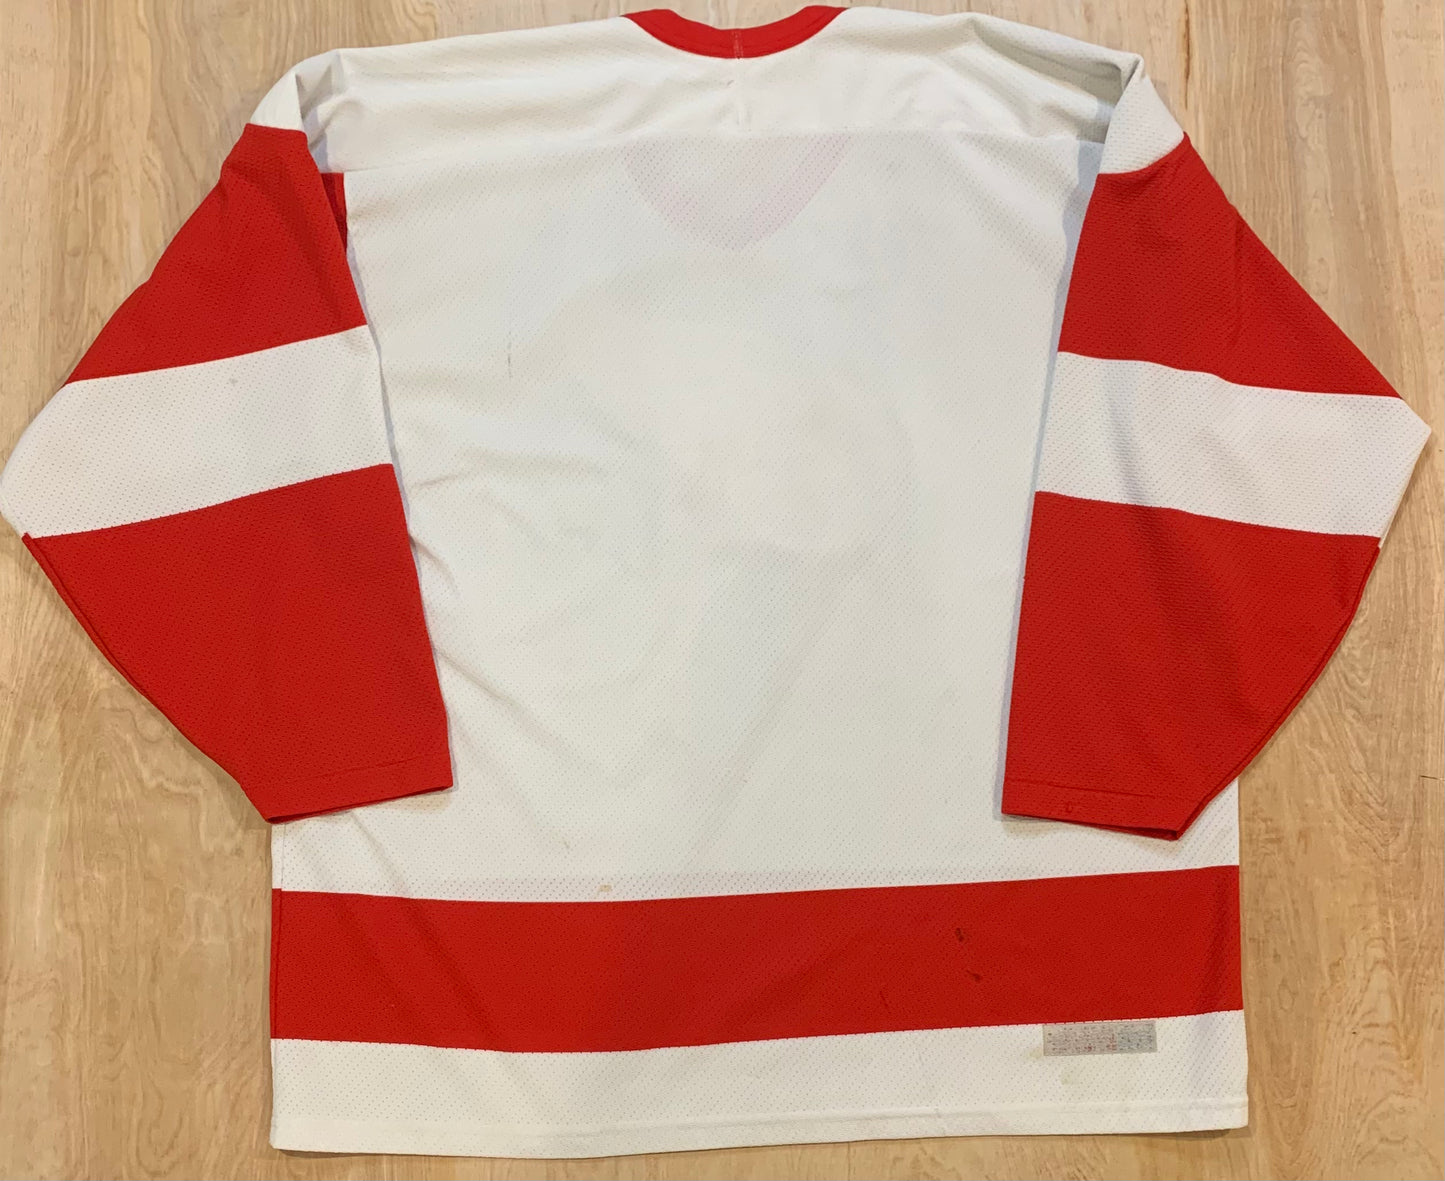 Classic Detroit Red Wings Hockey Jersey